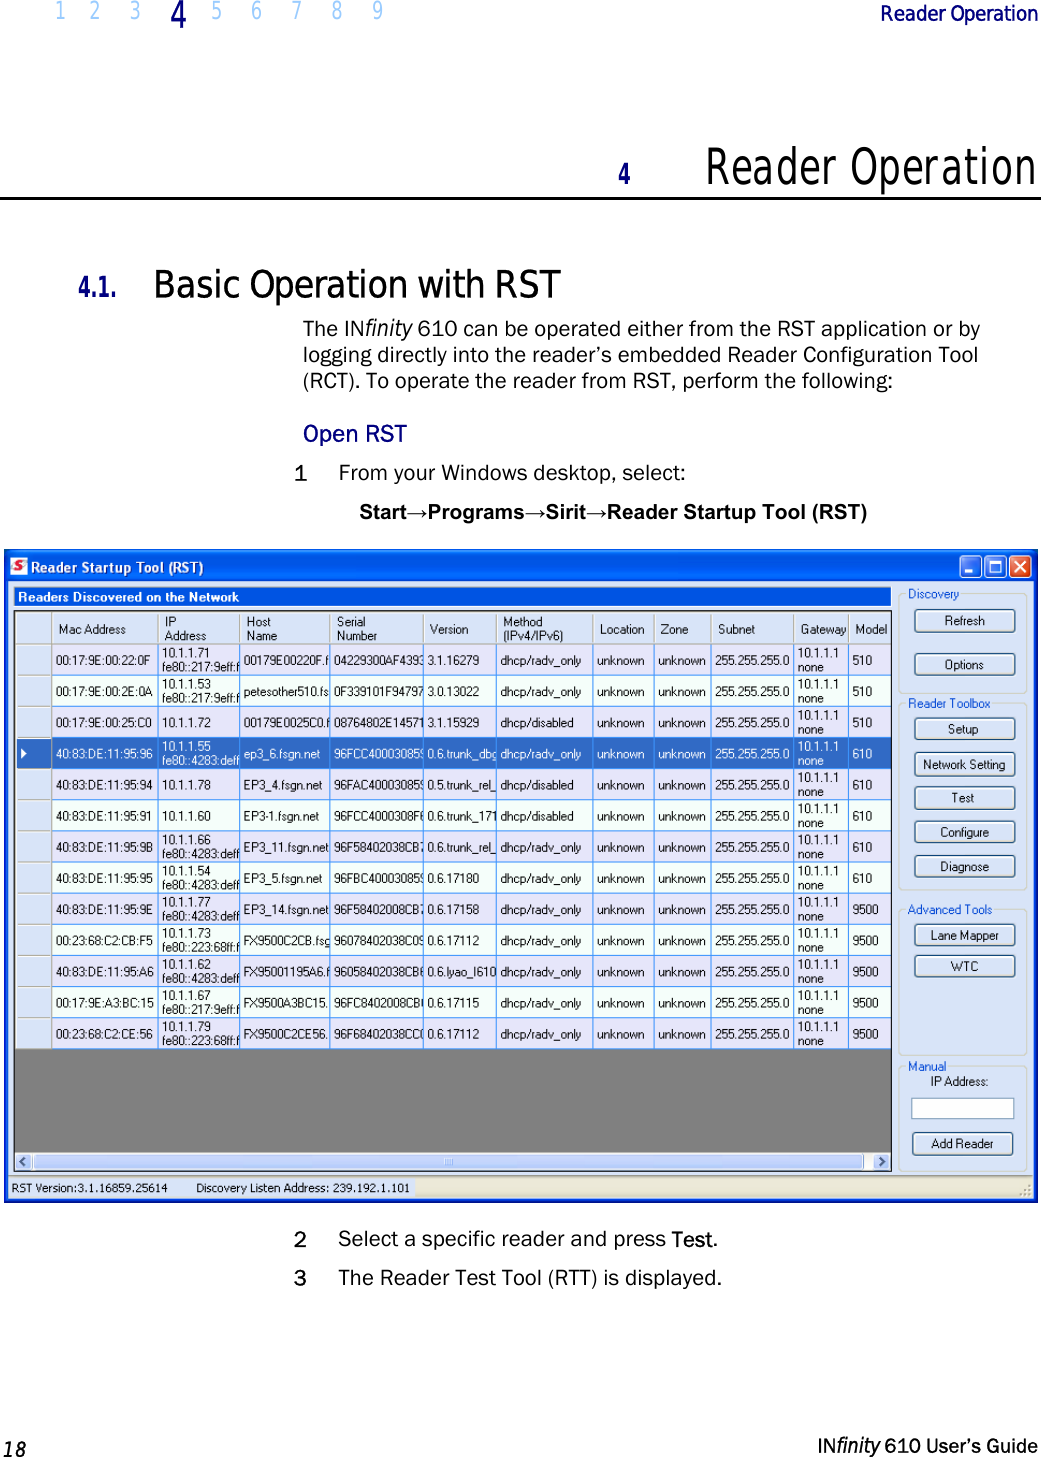  1 2  3  4  5 6 7 8 9        Reader Operation   18   INfinity 610 User’s Guide  4 Reader Operation  4.1. Basic Operation with RST The INfinity 610 can be operated either from the RST application or by logging directly into the reader’s embedded Reader Configuration Tool (RCT). To operate the reader from RST, perform the following: Open RST 1 From your Windows desktop, select: Start→Programs→Sirit→Reader Startup Tool (RST)  2 Select a specific reader and press Test.  3 The Reader Test Tool (RTT) is displayed. 